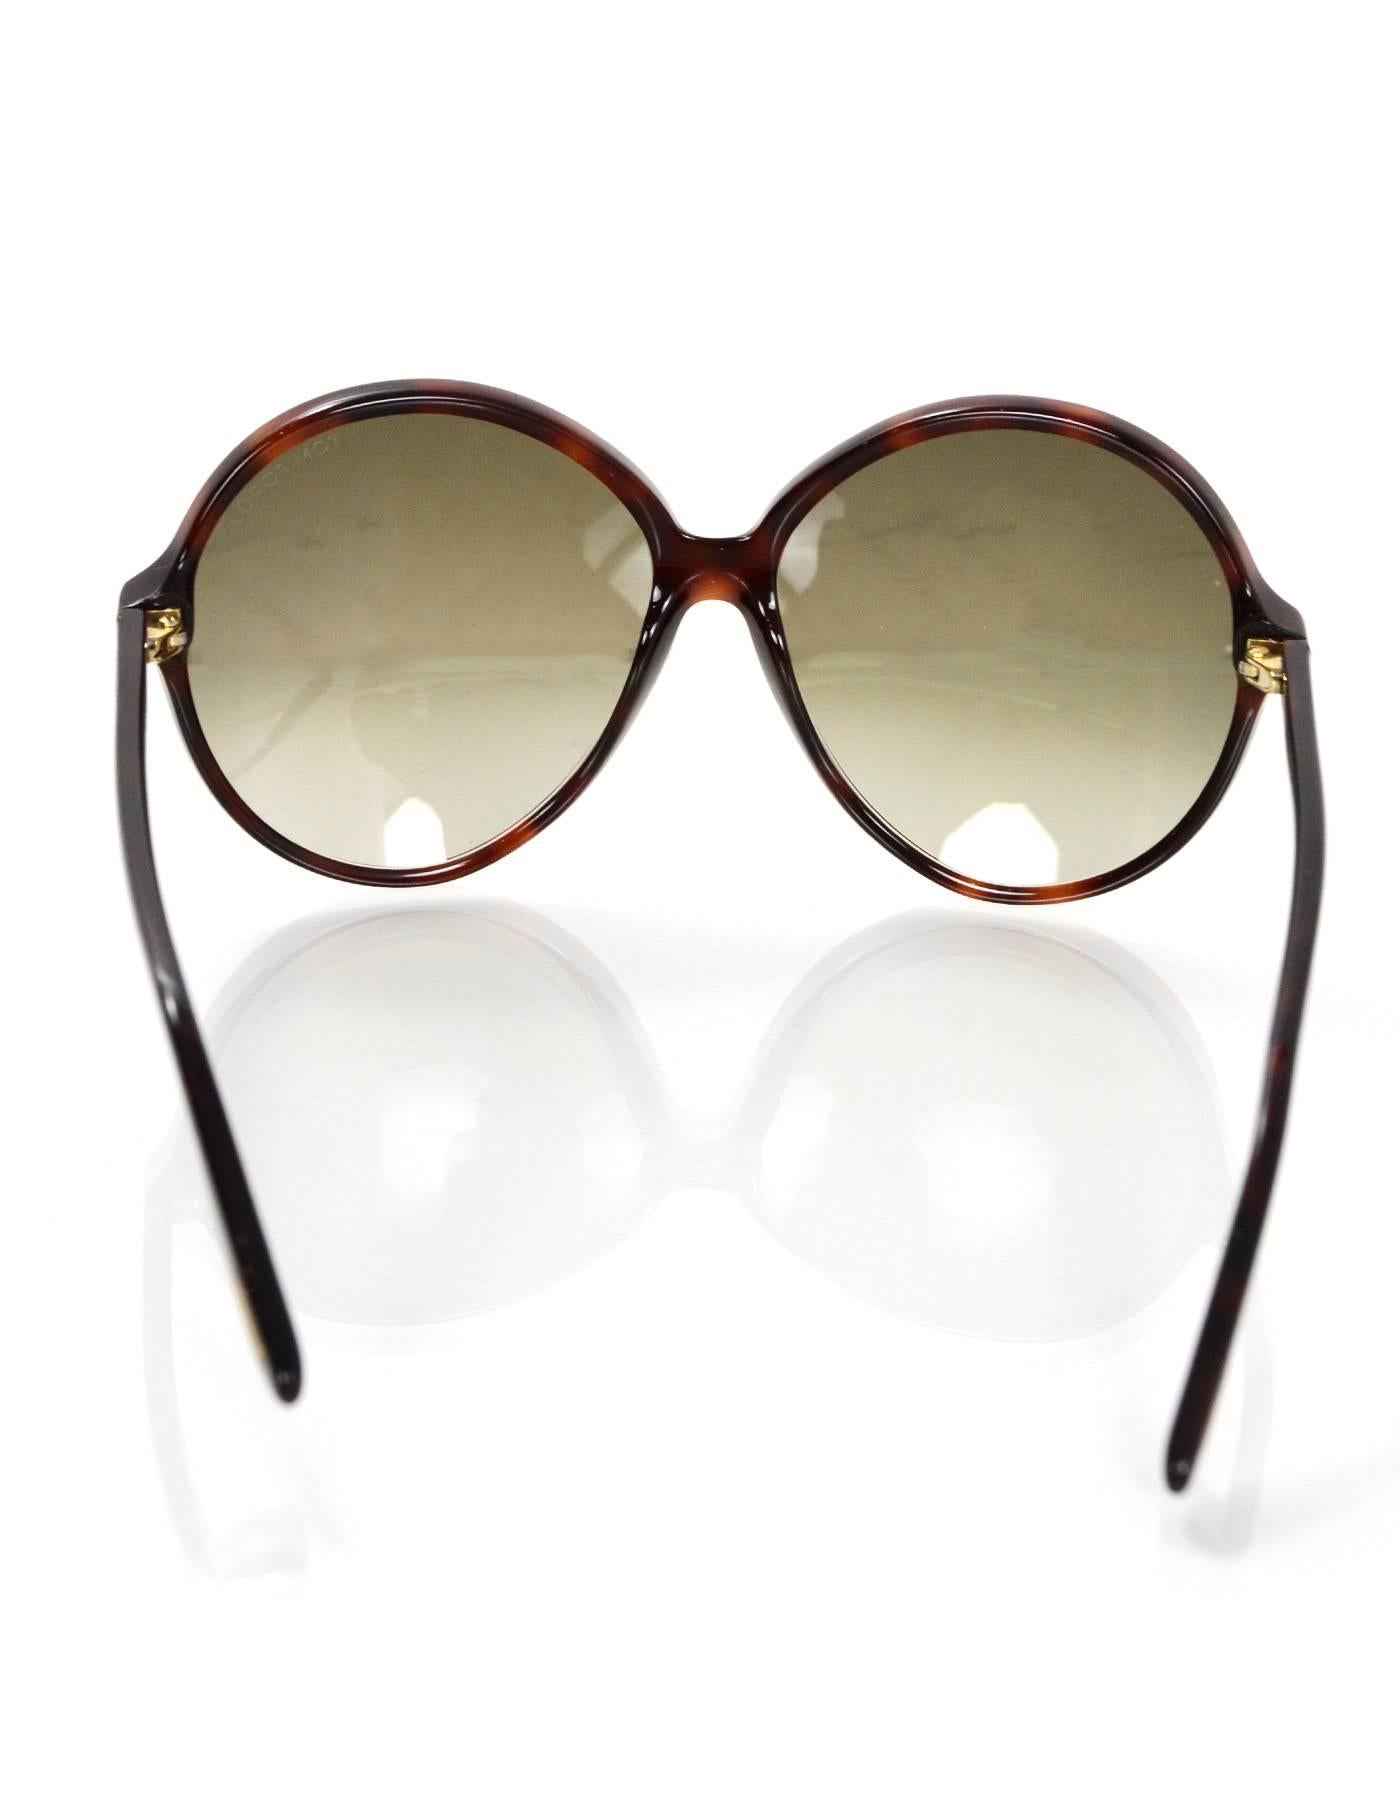 Brown Tom Ford Tortoise Rhonda Round Frame Sunglasses with Case